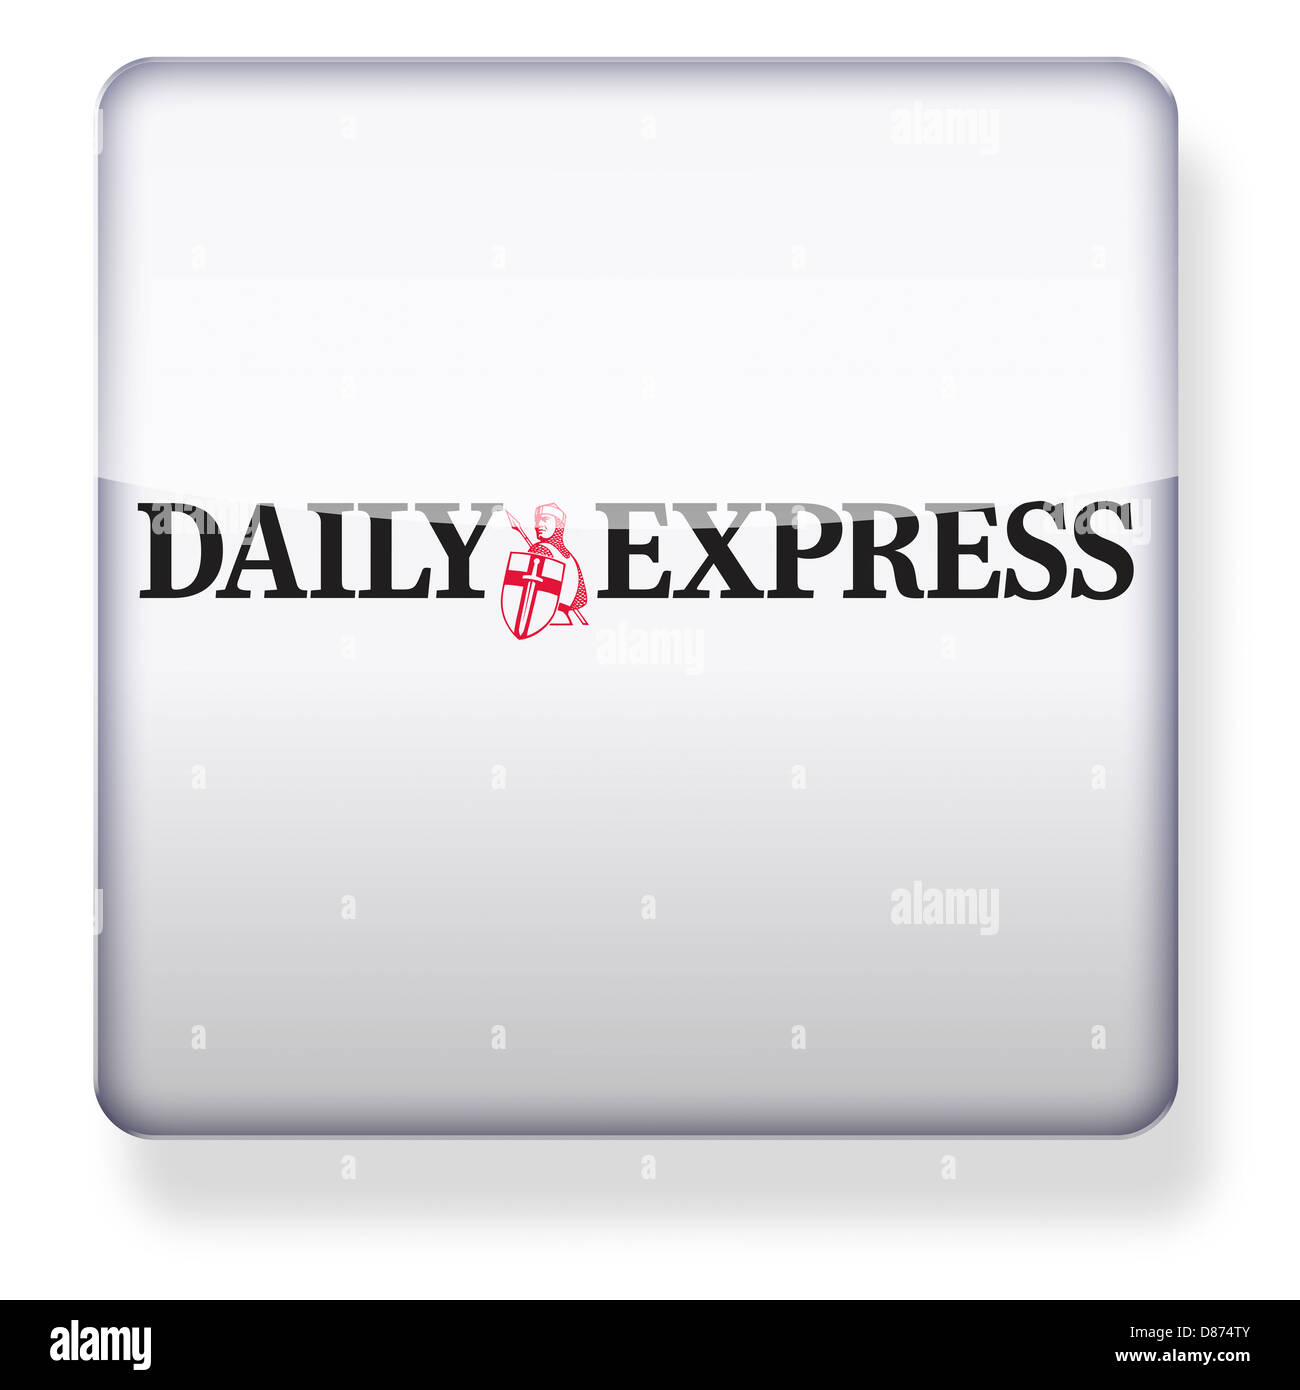 Daily Express logo as an app icon. Clipping path included. Stock Photo